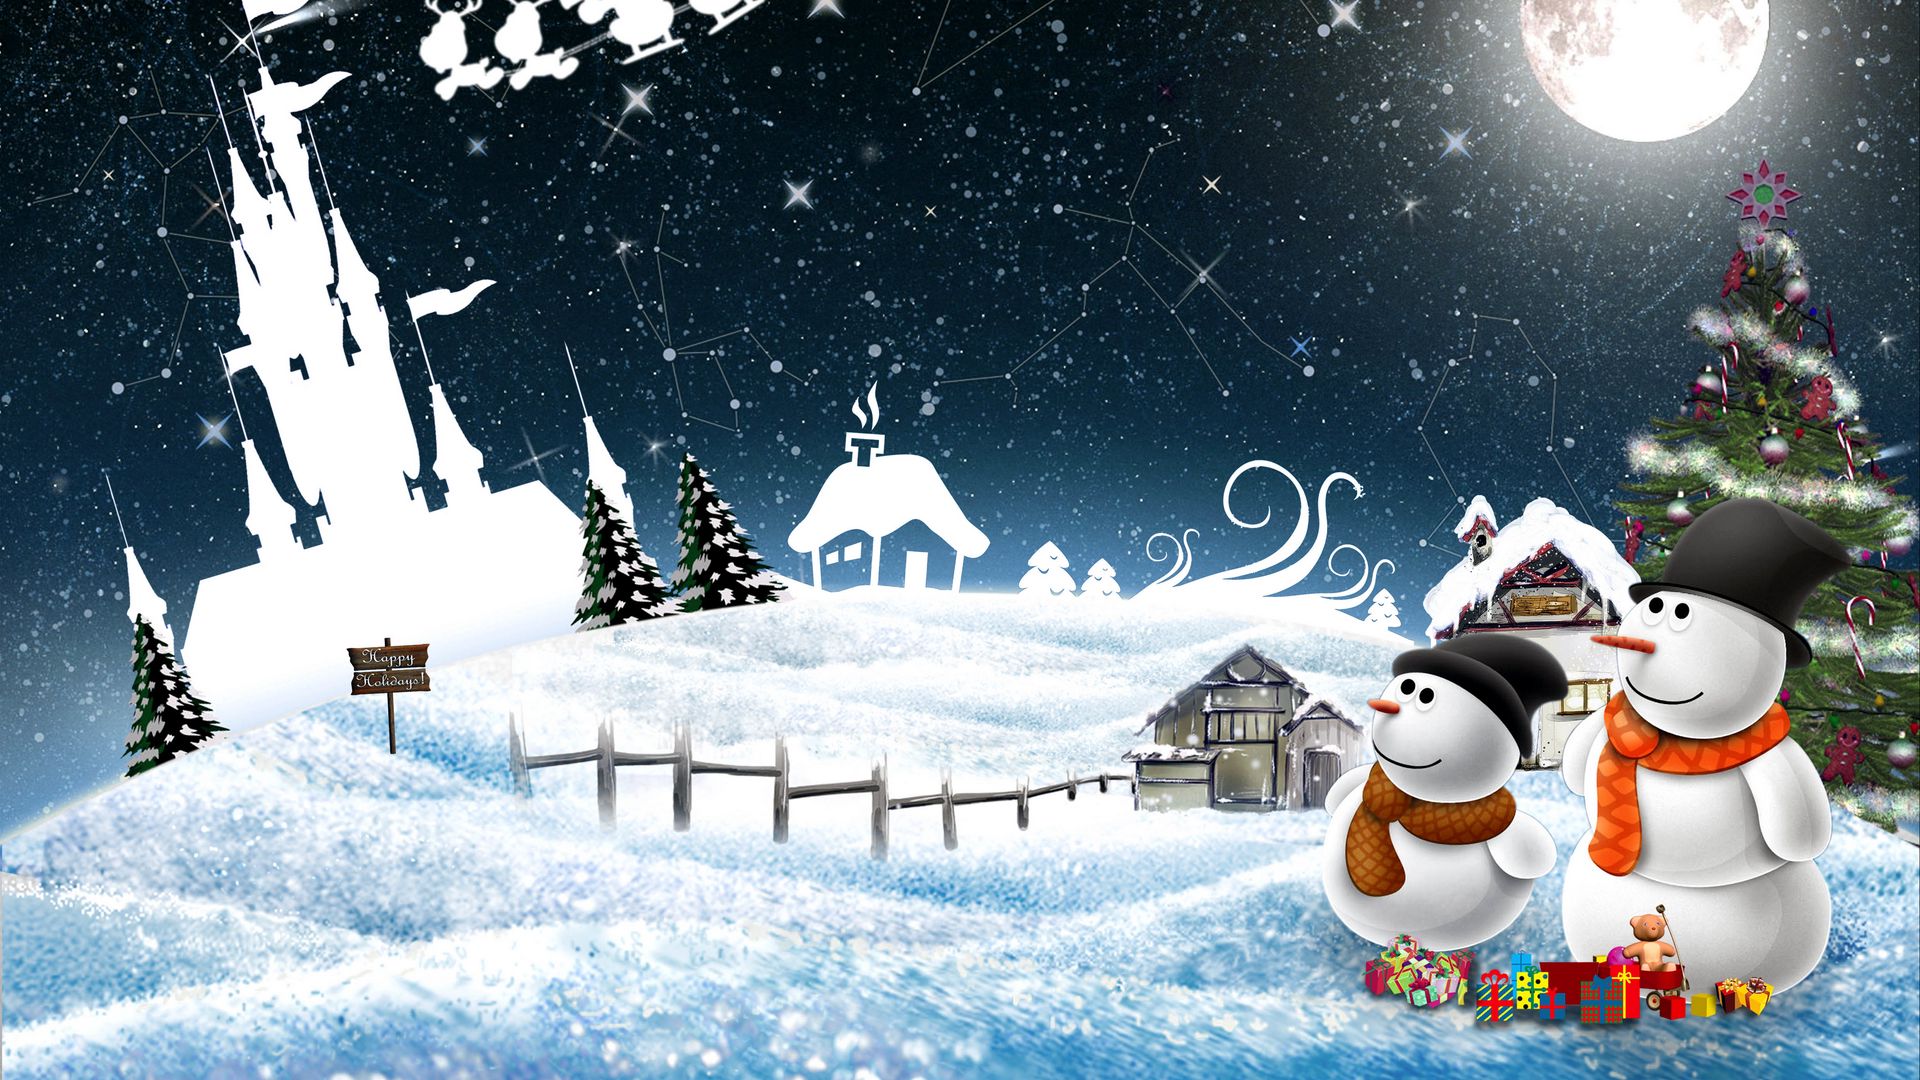 Download wallpaper 1920x1080 new year, snowmen, night, greeting, holiday,  christmas full hd, hdtv, fhd, 1080p hd background